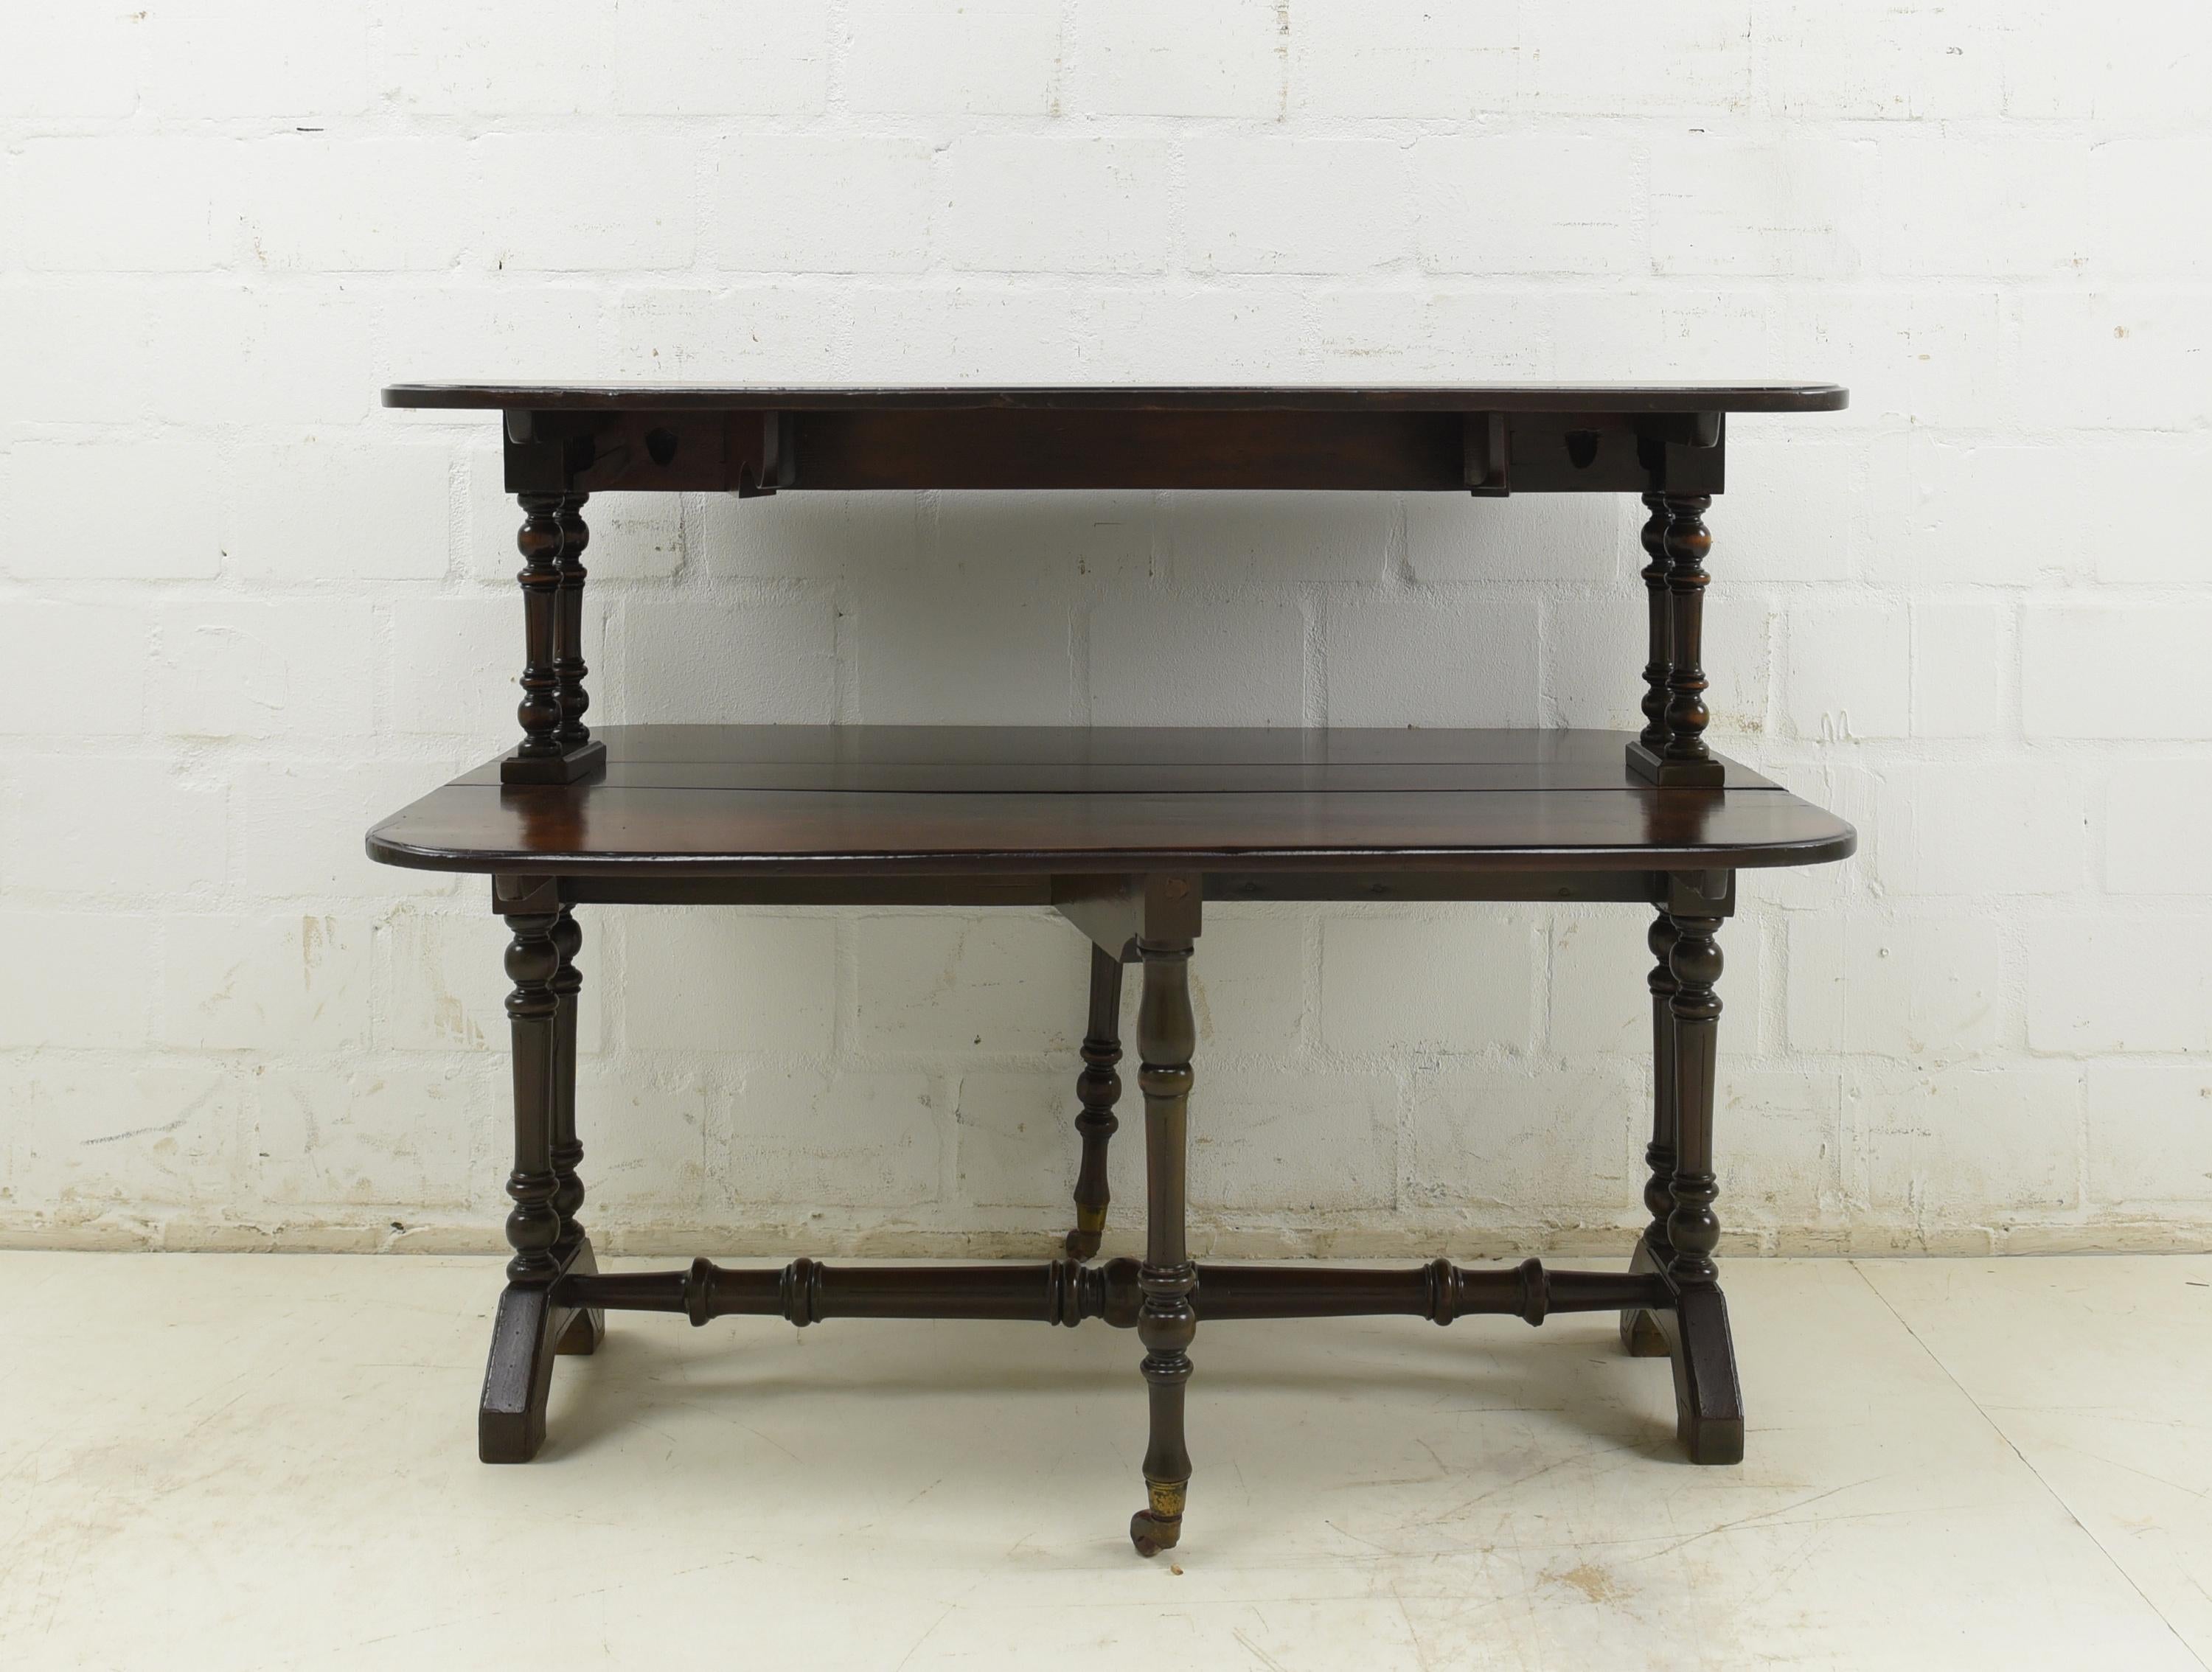 Two Tier Gateleg Folding Table Restored England Mahogany Shelving Table

Features:
Two-storey, shelf-like design
Both plates can be opened and closed on both sides
Beautiful patina
Beautiful grain
Very unusual and rare model

Additional